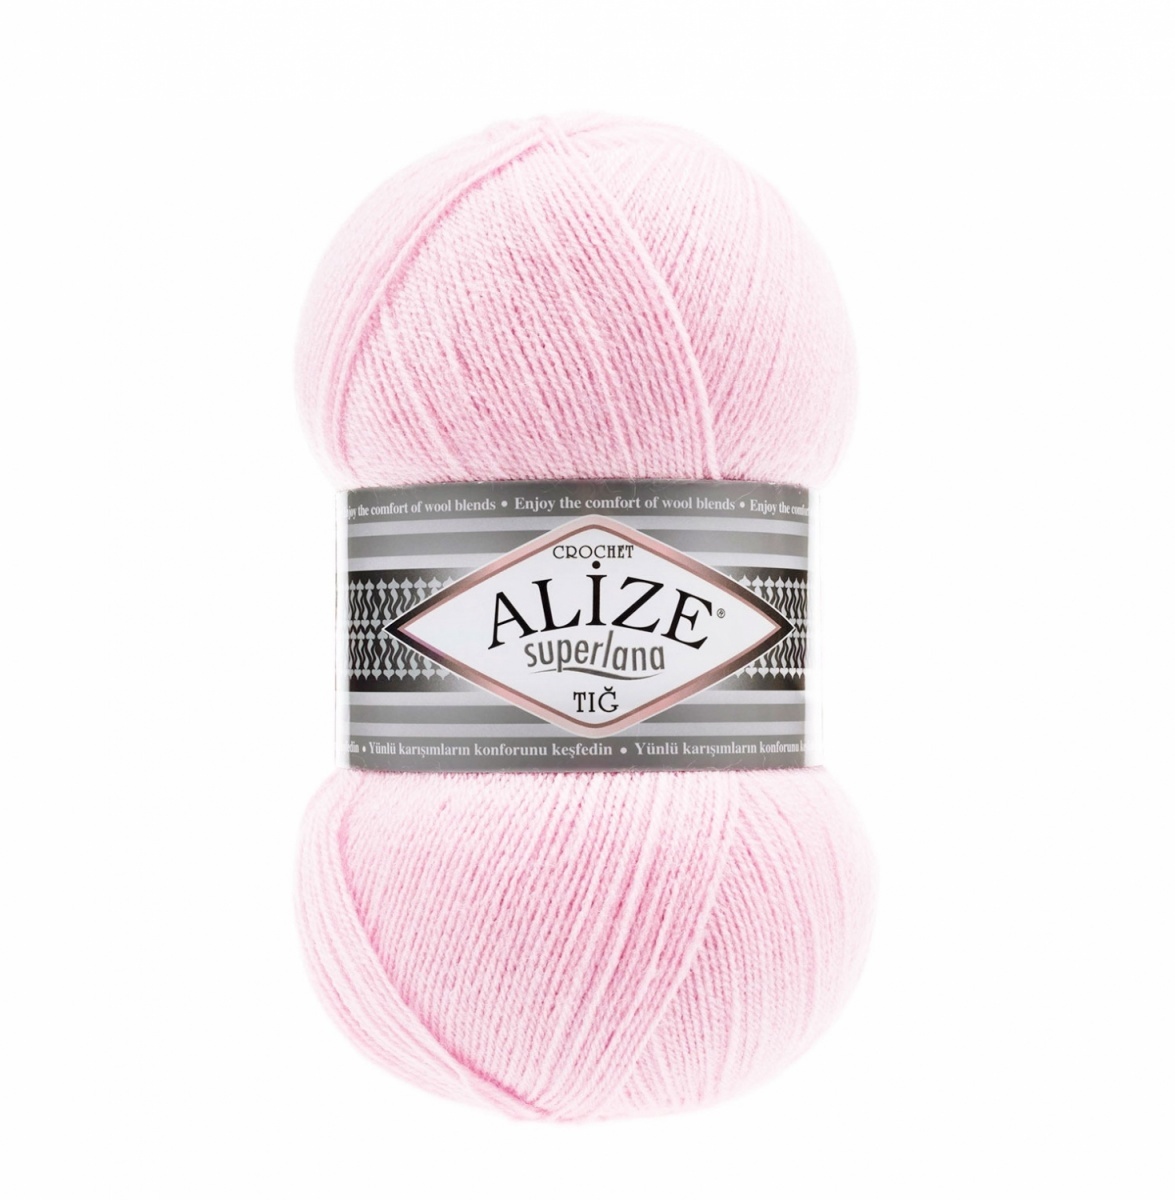 Alize Superlana Tig 25% Wool, 75% Acrylic, 5 Skein Value Pack, 500g фото 1